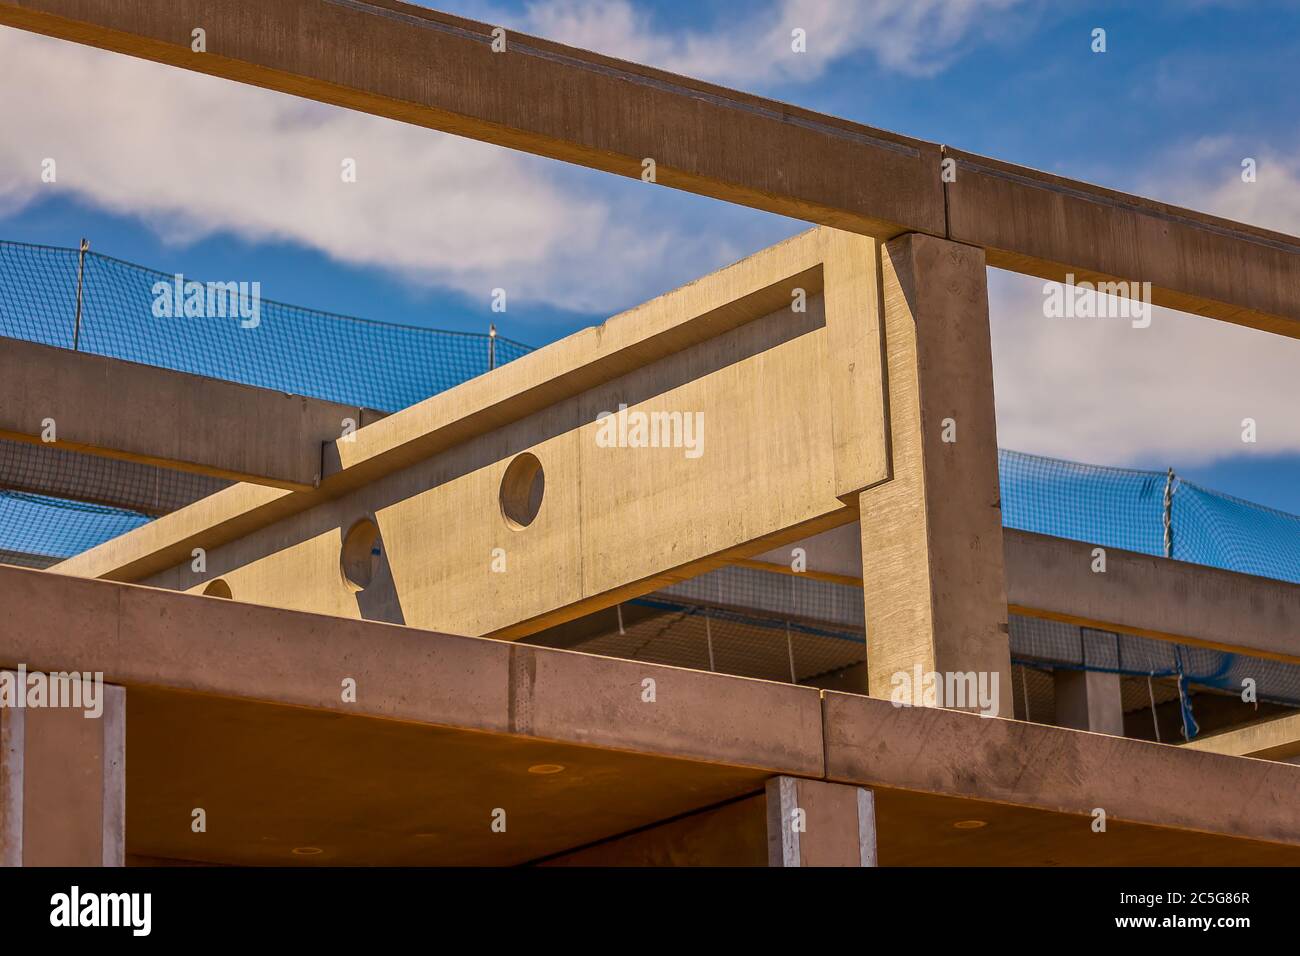 Construction site with precast concrete columns, beams and walls Stock Photo